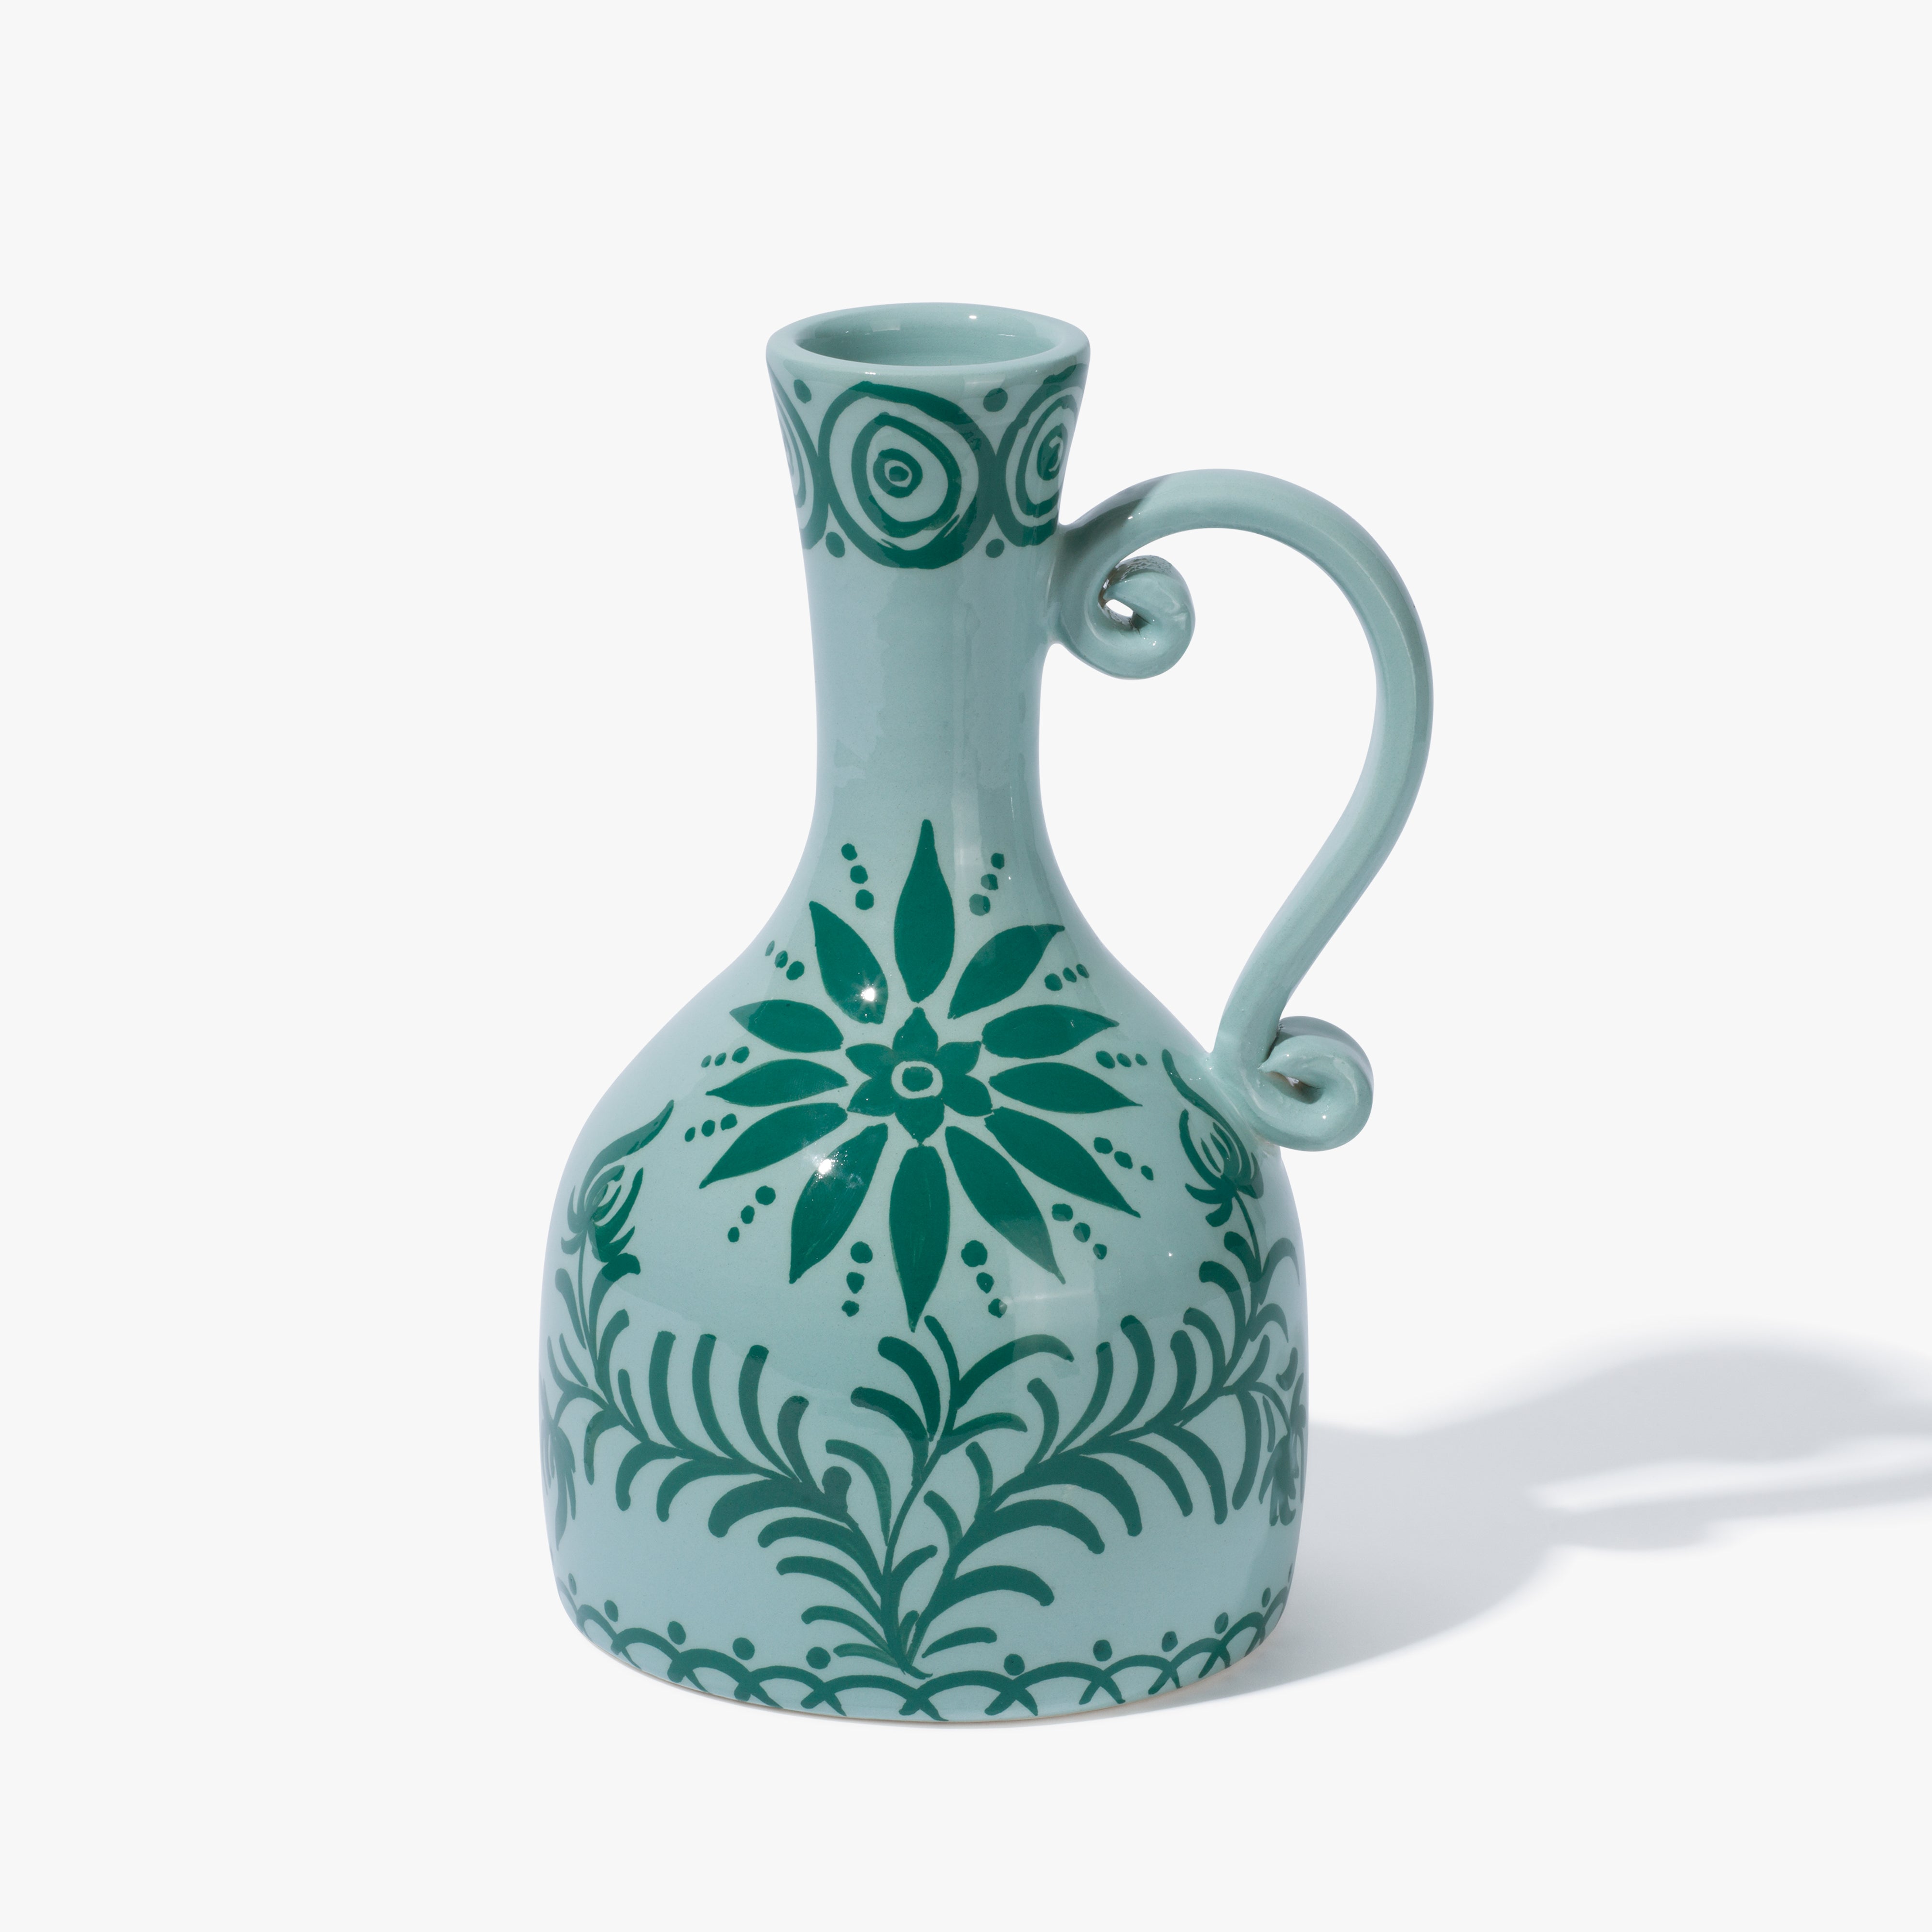 A Vaisselle ceramic vase witha handle. The vase is light blue and contains a decorative pattern in forest/ pine green.